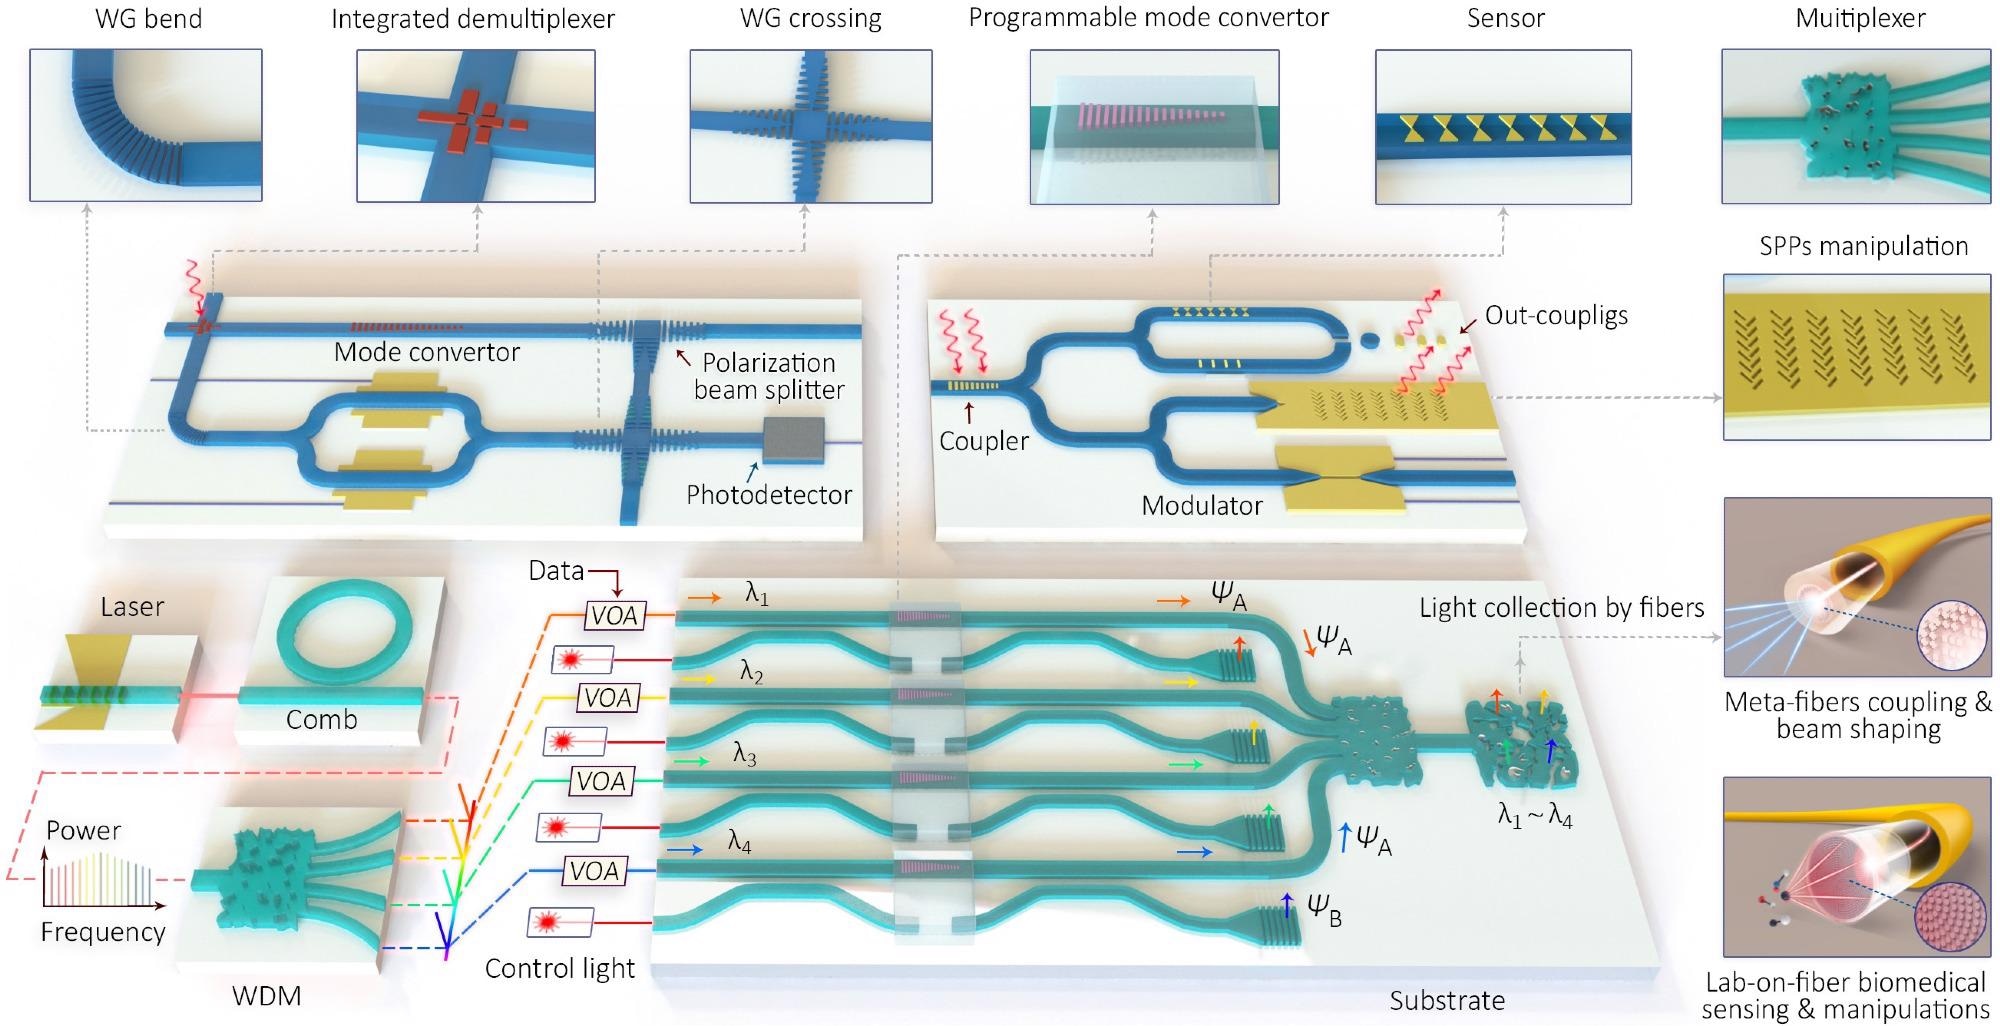 Outlook on photonic integrated “meta-circuits”. Diverse meta-waveguide-based photonic devices can be competitive substitutes for conventional integrated optical scenarios with compact footprint, enhanced efficiency and multifunctionality